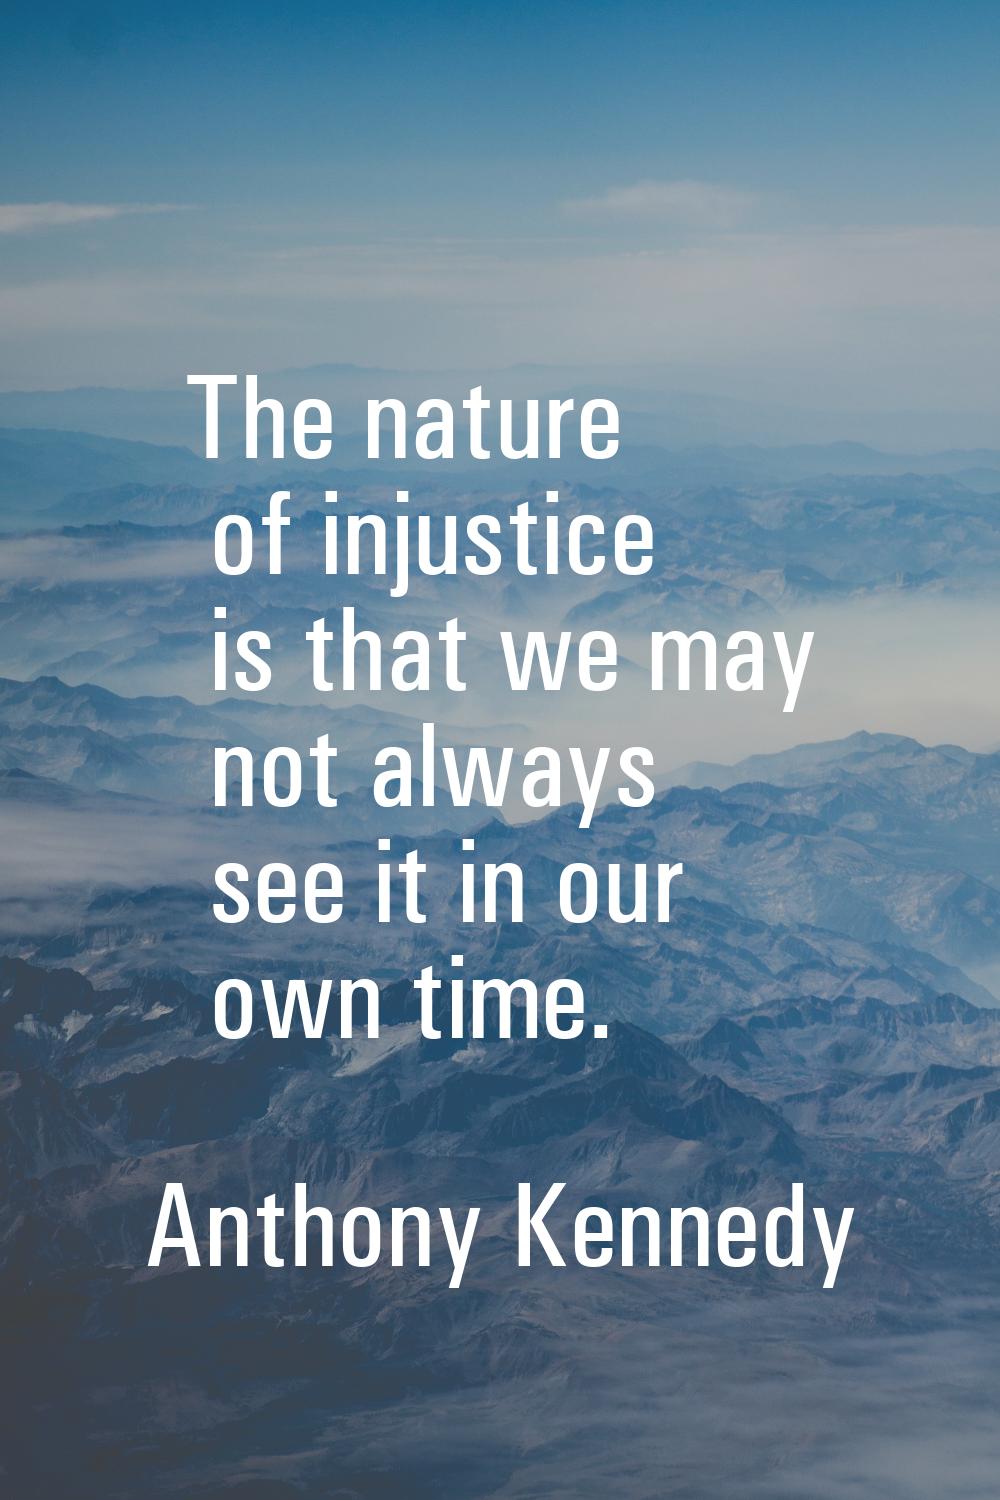 The nature of injustice is that we may not always see it in our own time.